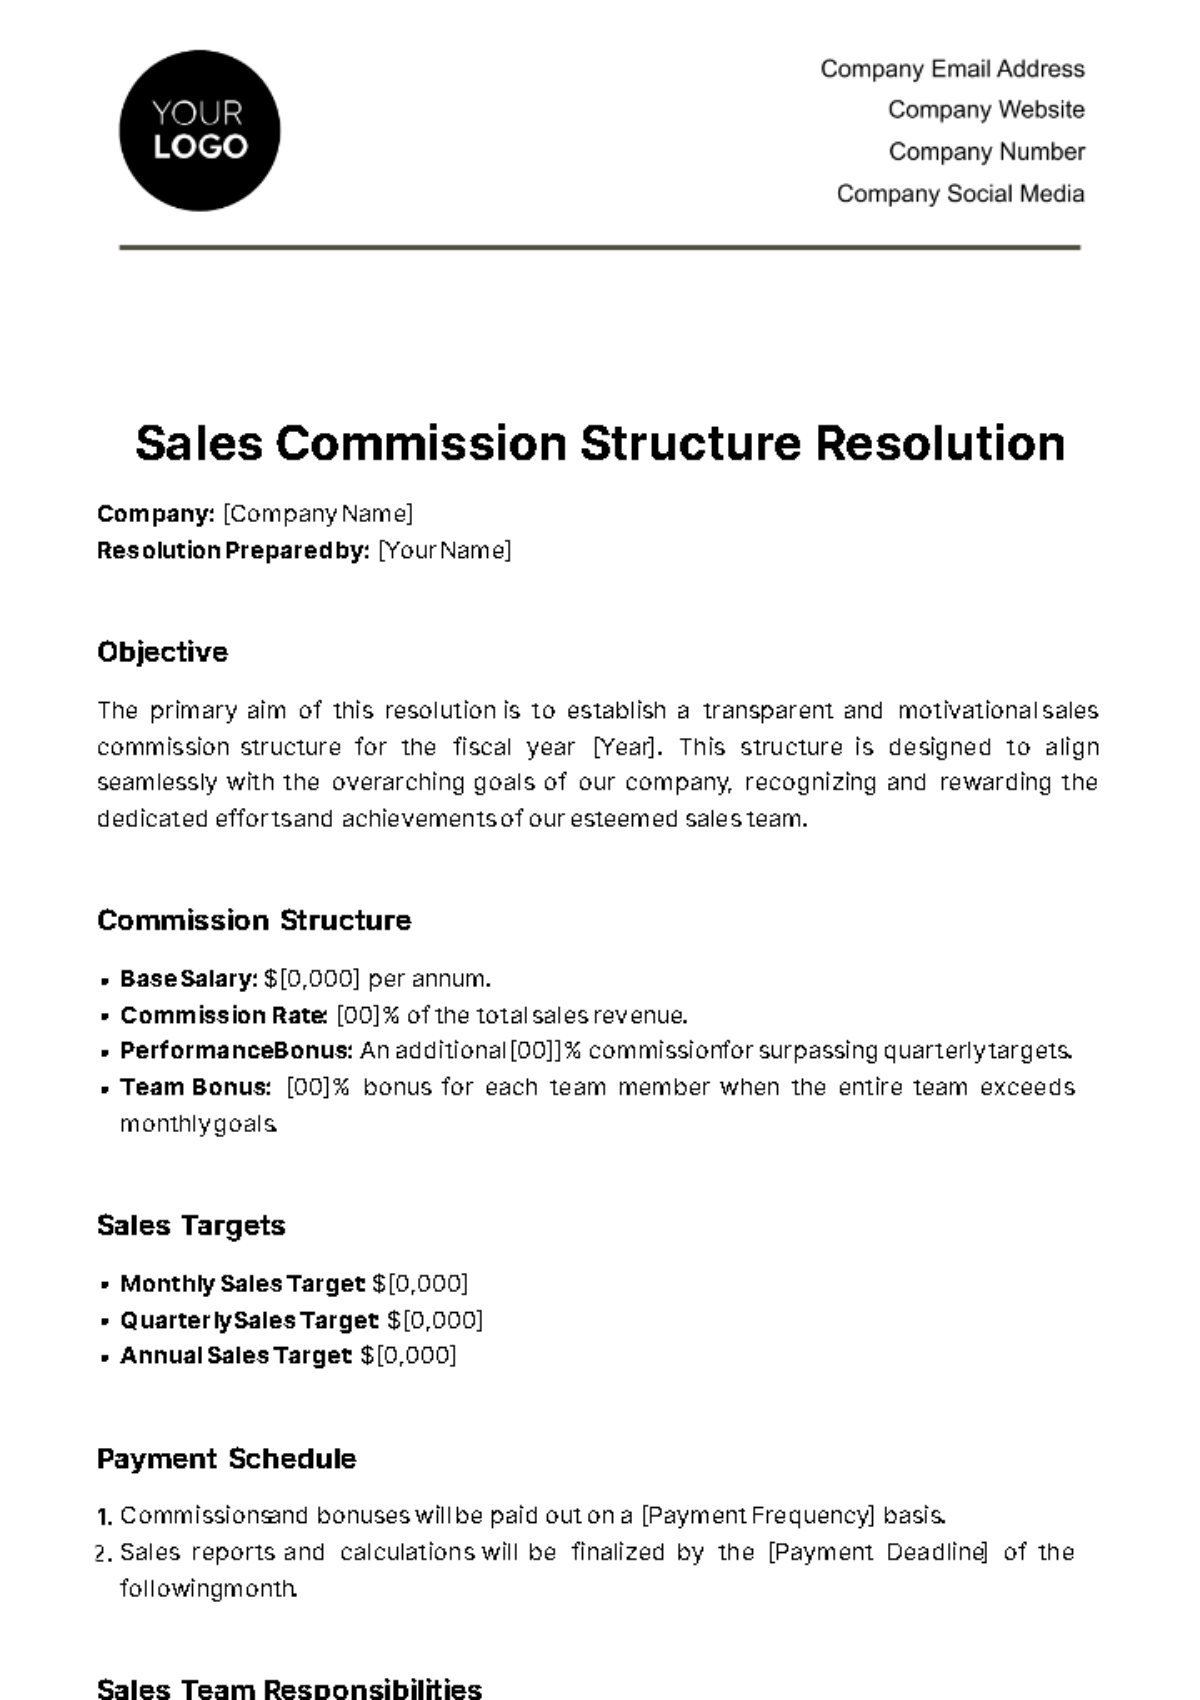 Free Sales Commission Structure Resolution Template